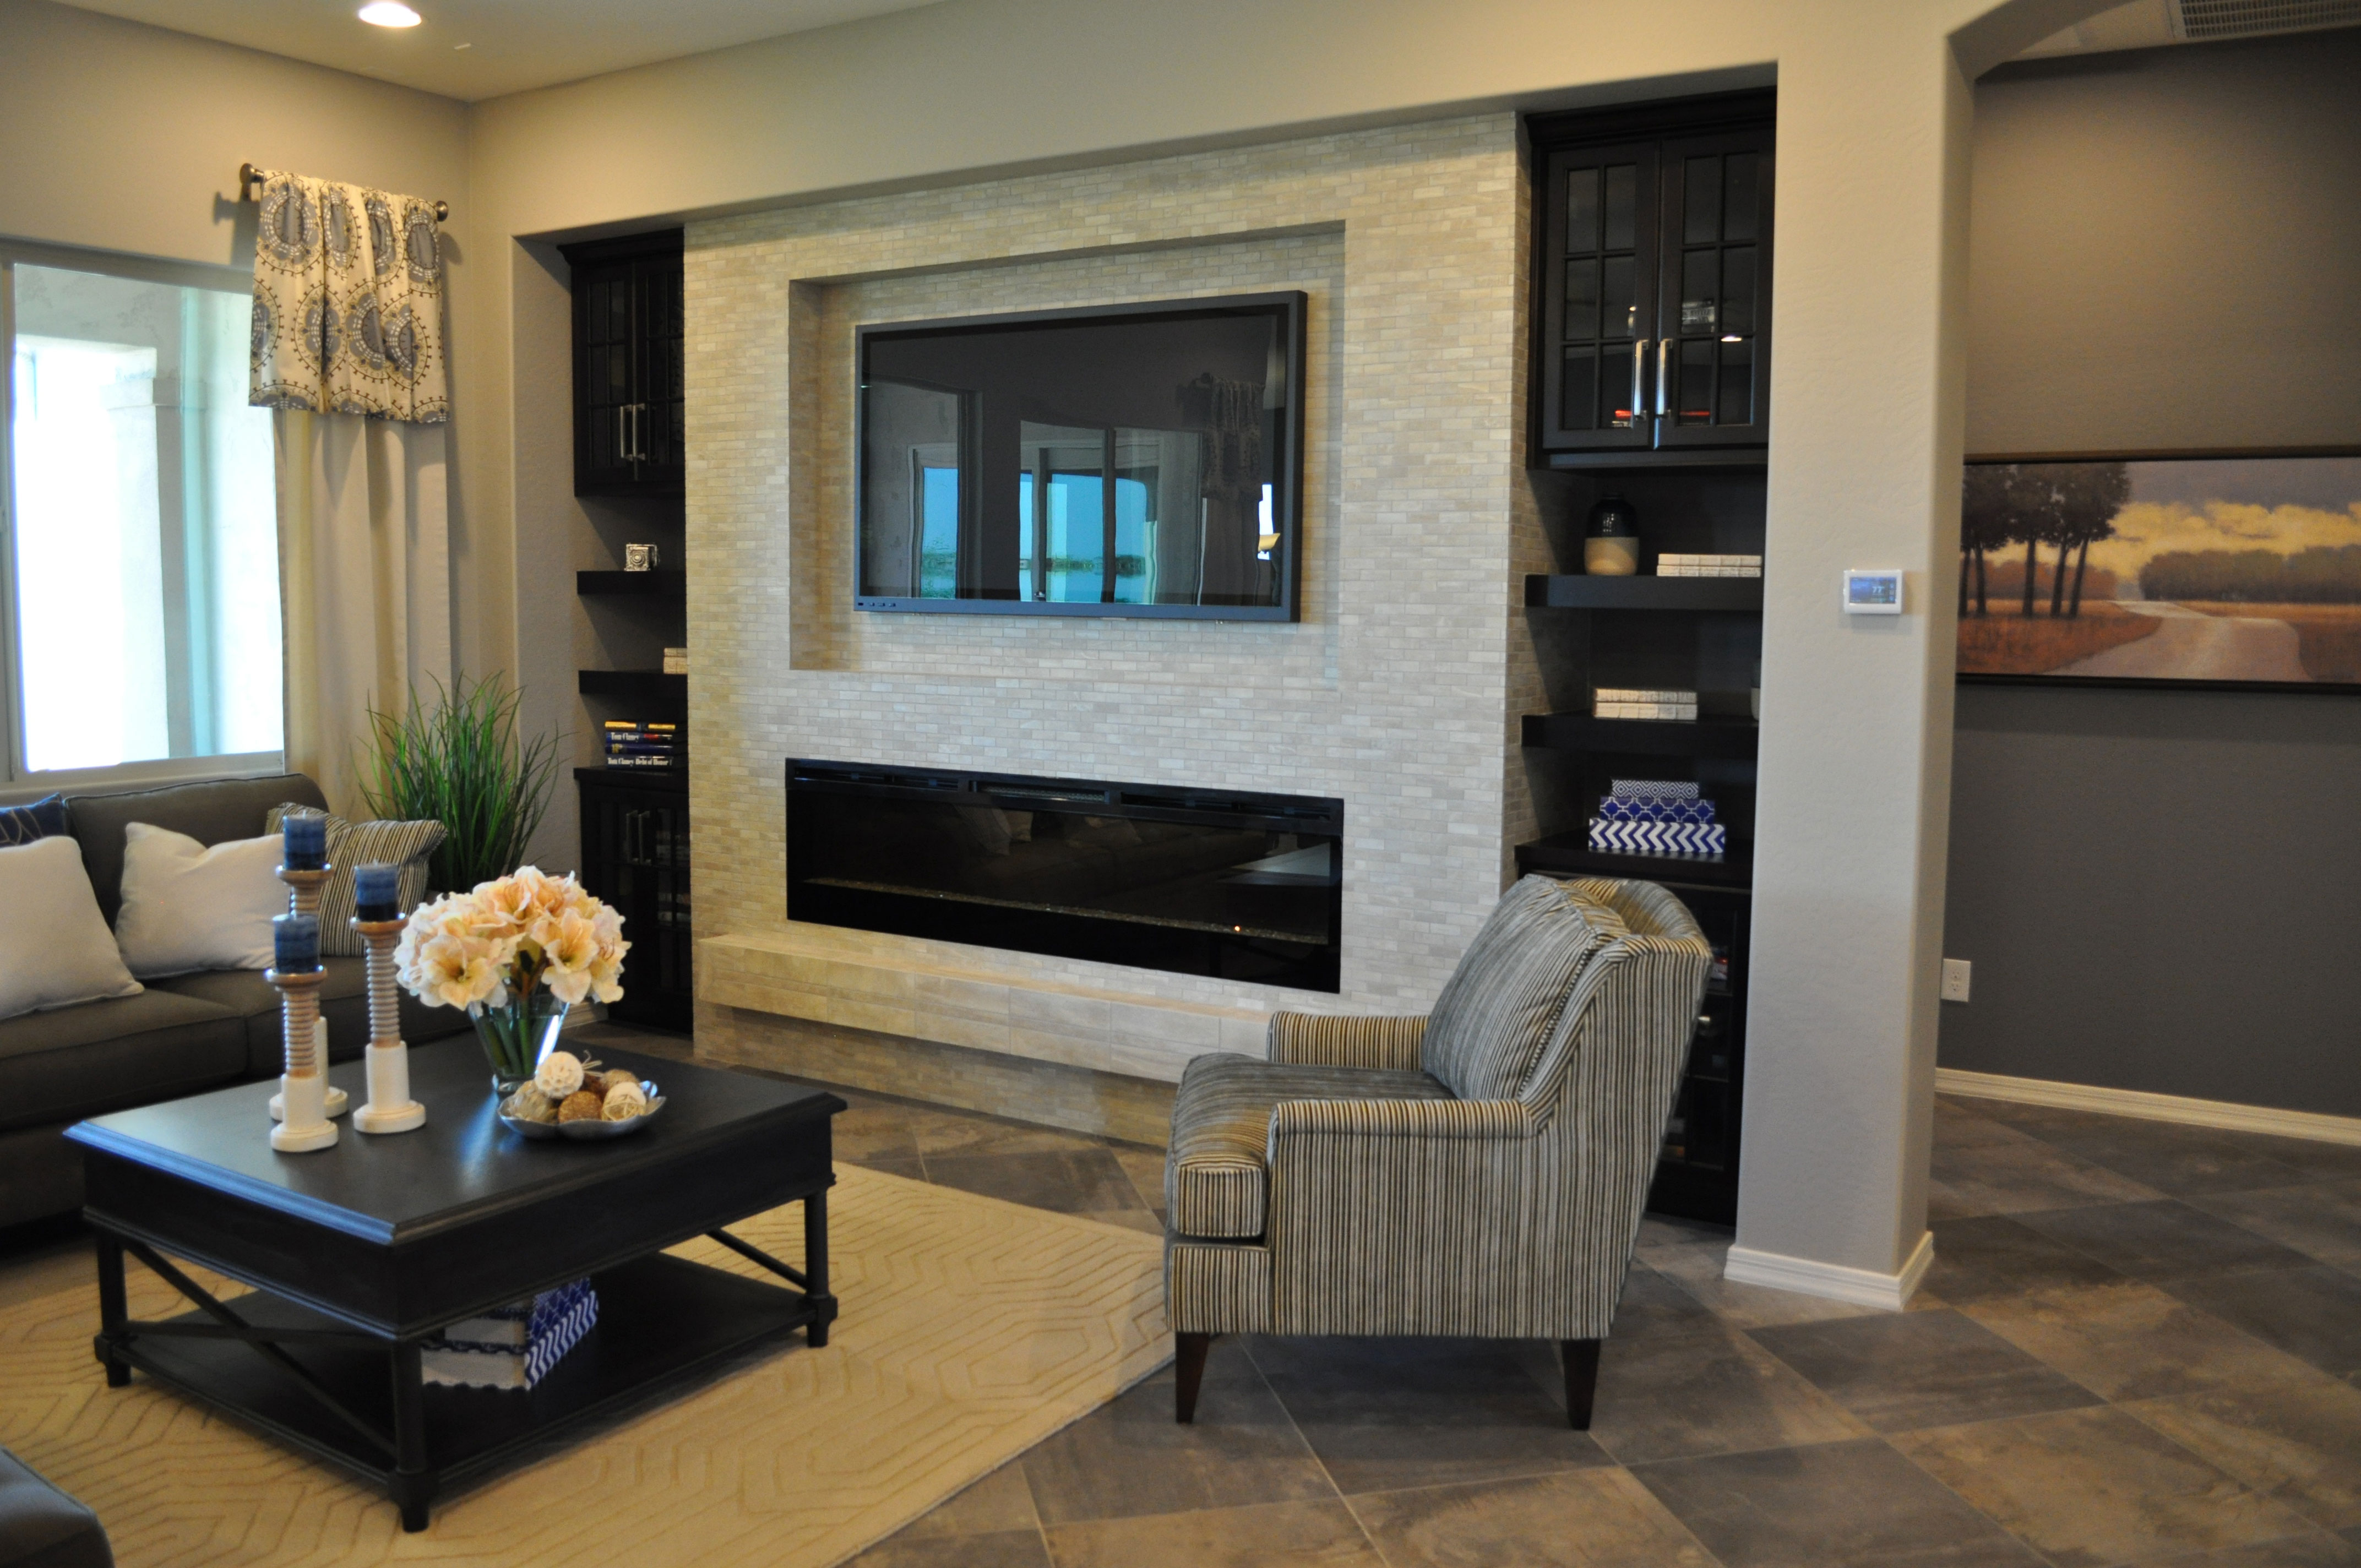 Entertainment center from the Rancho Mirage model in Oasis at Queen Creek